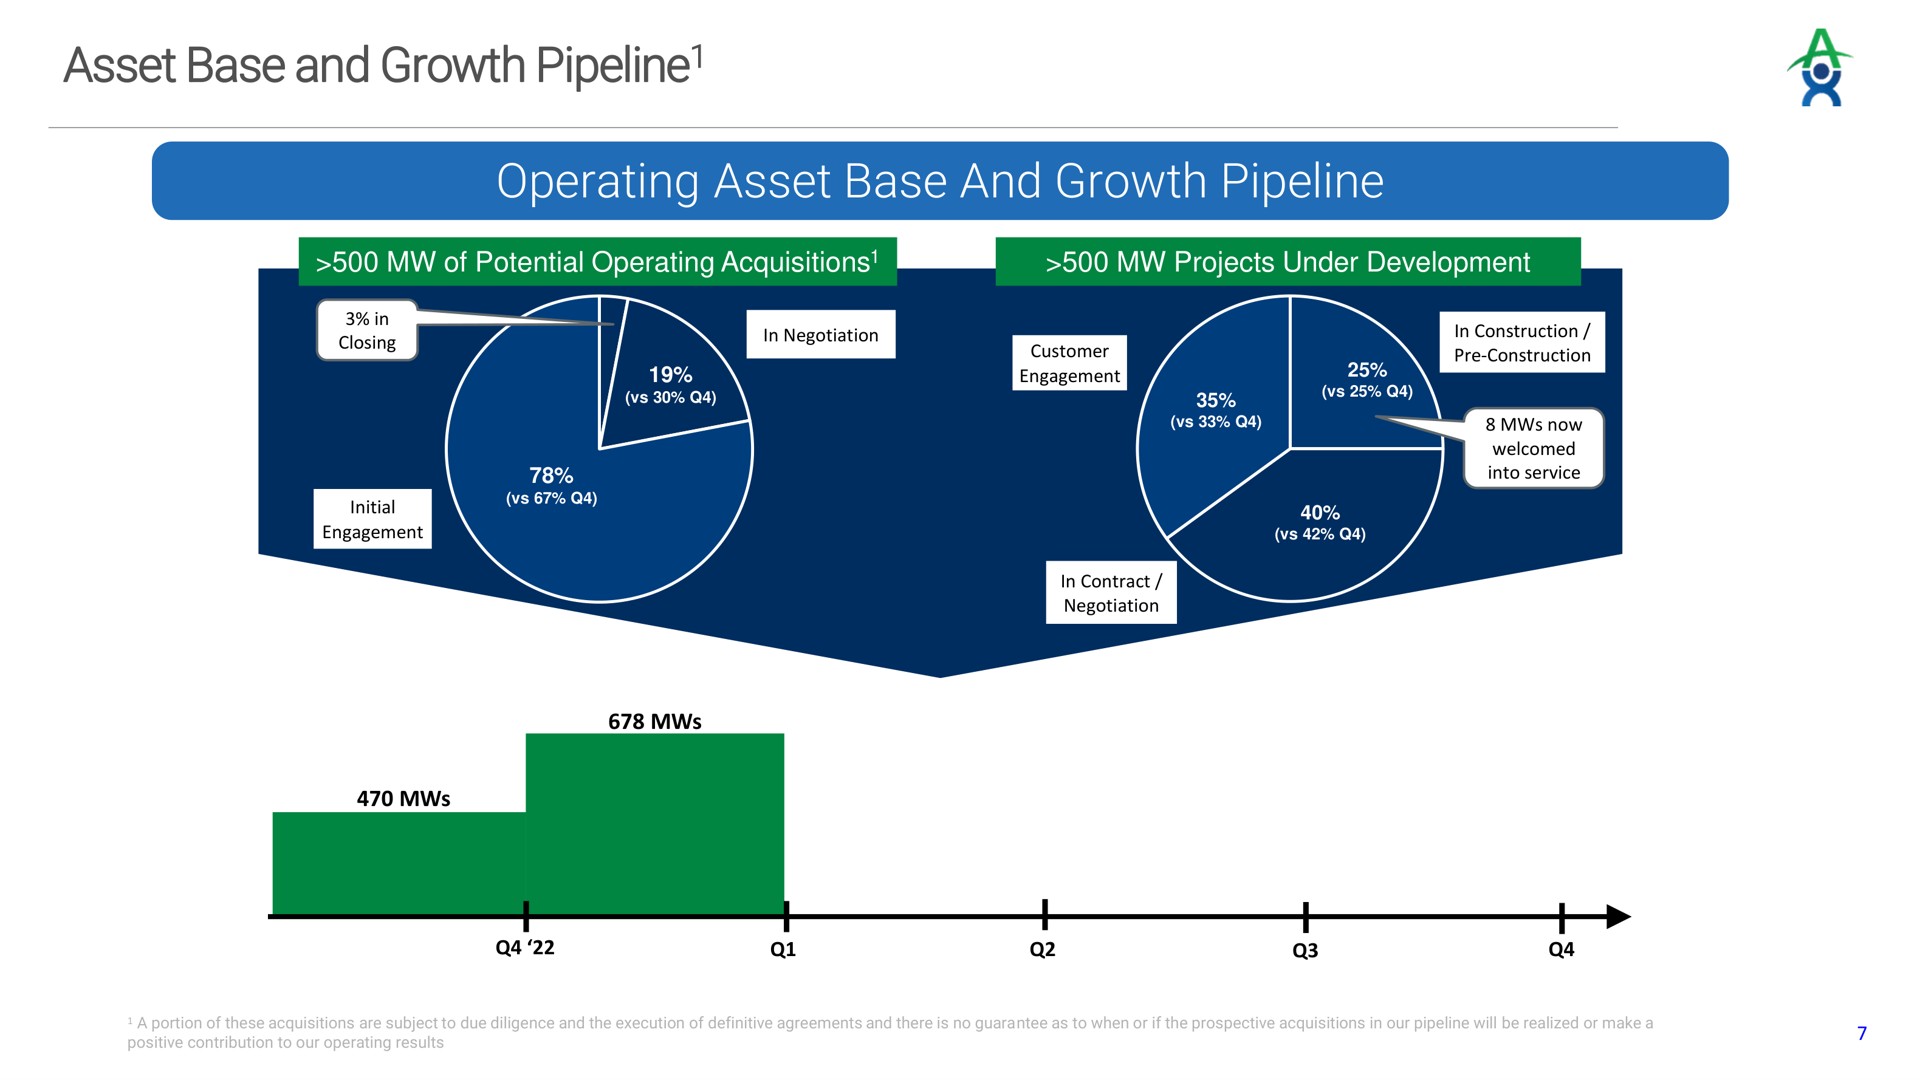 asset base and growth pipeline operating asset base and growth pipeline over watt of actionable pipeline | Altus Power